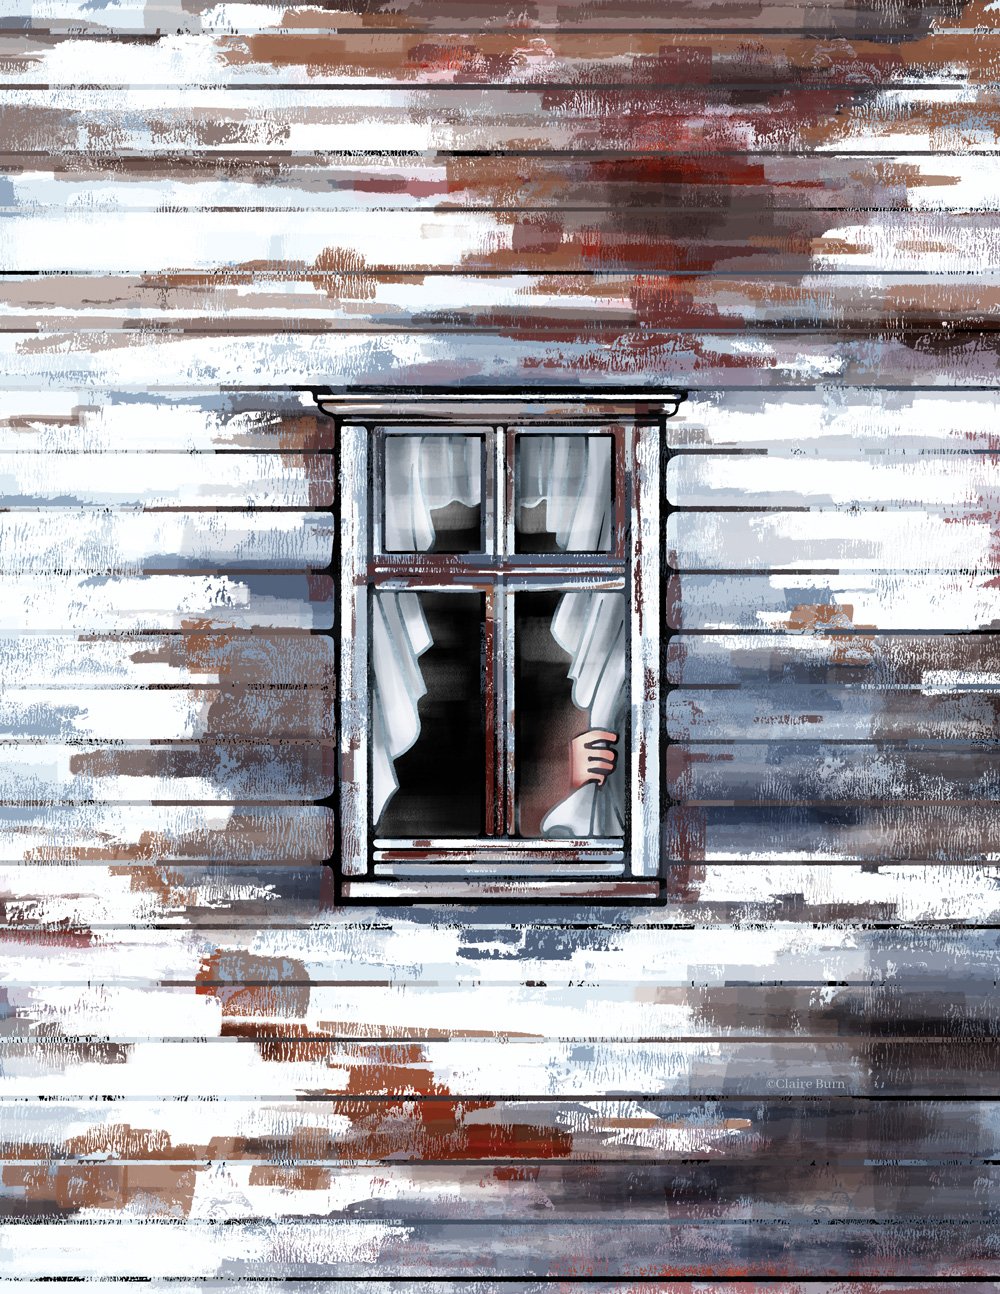 A ghostly hand pulls back the curtain in the window of an abandoned house.